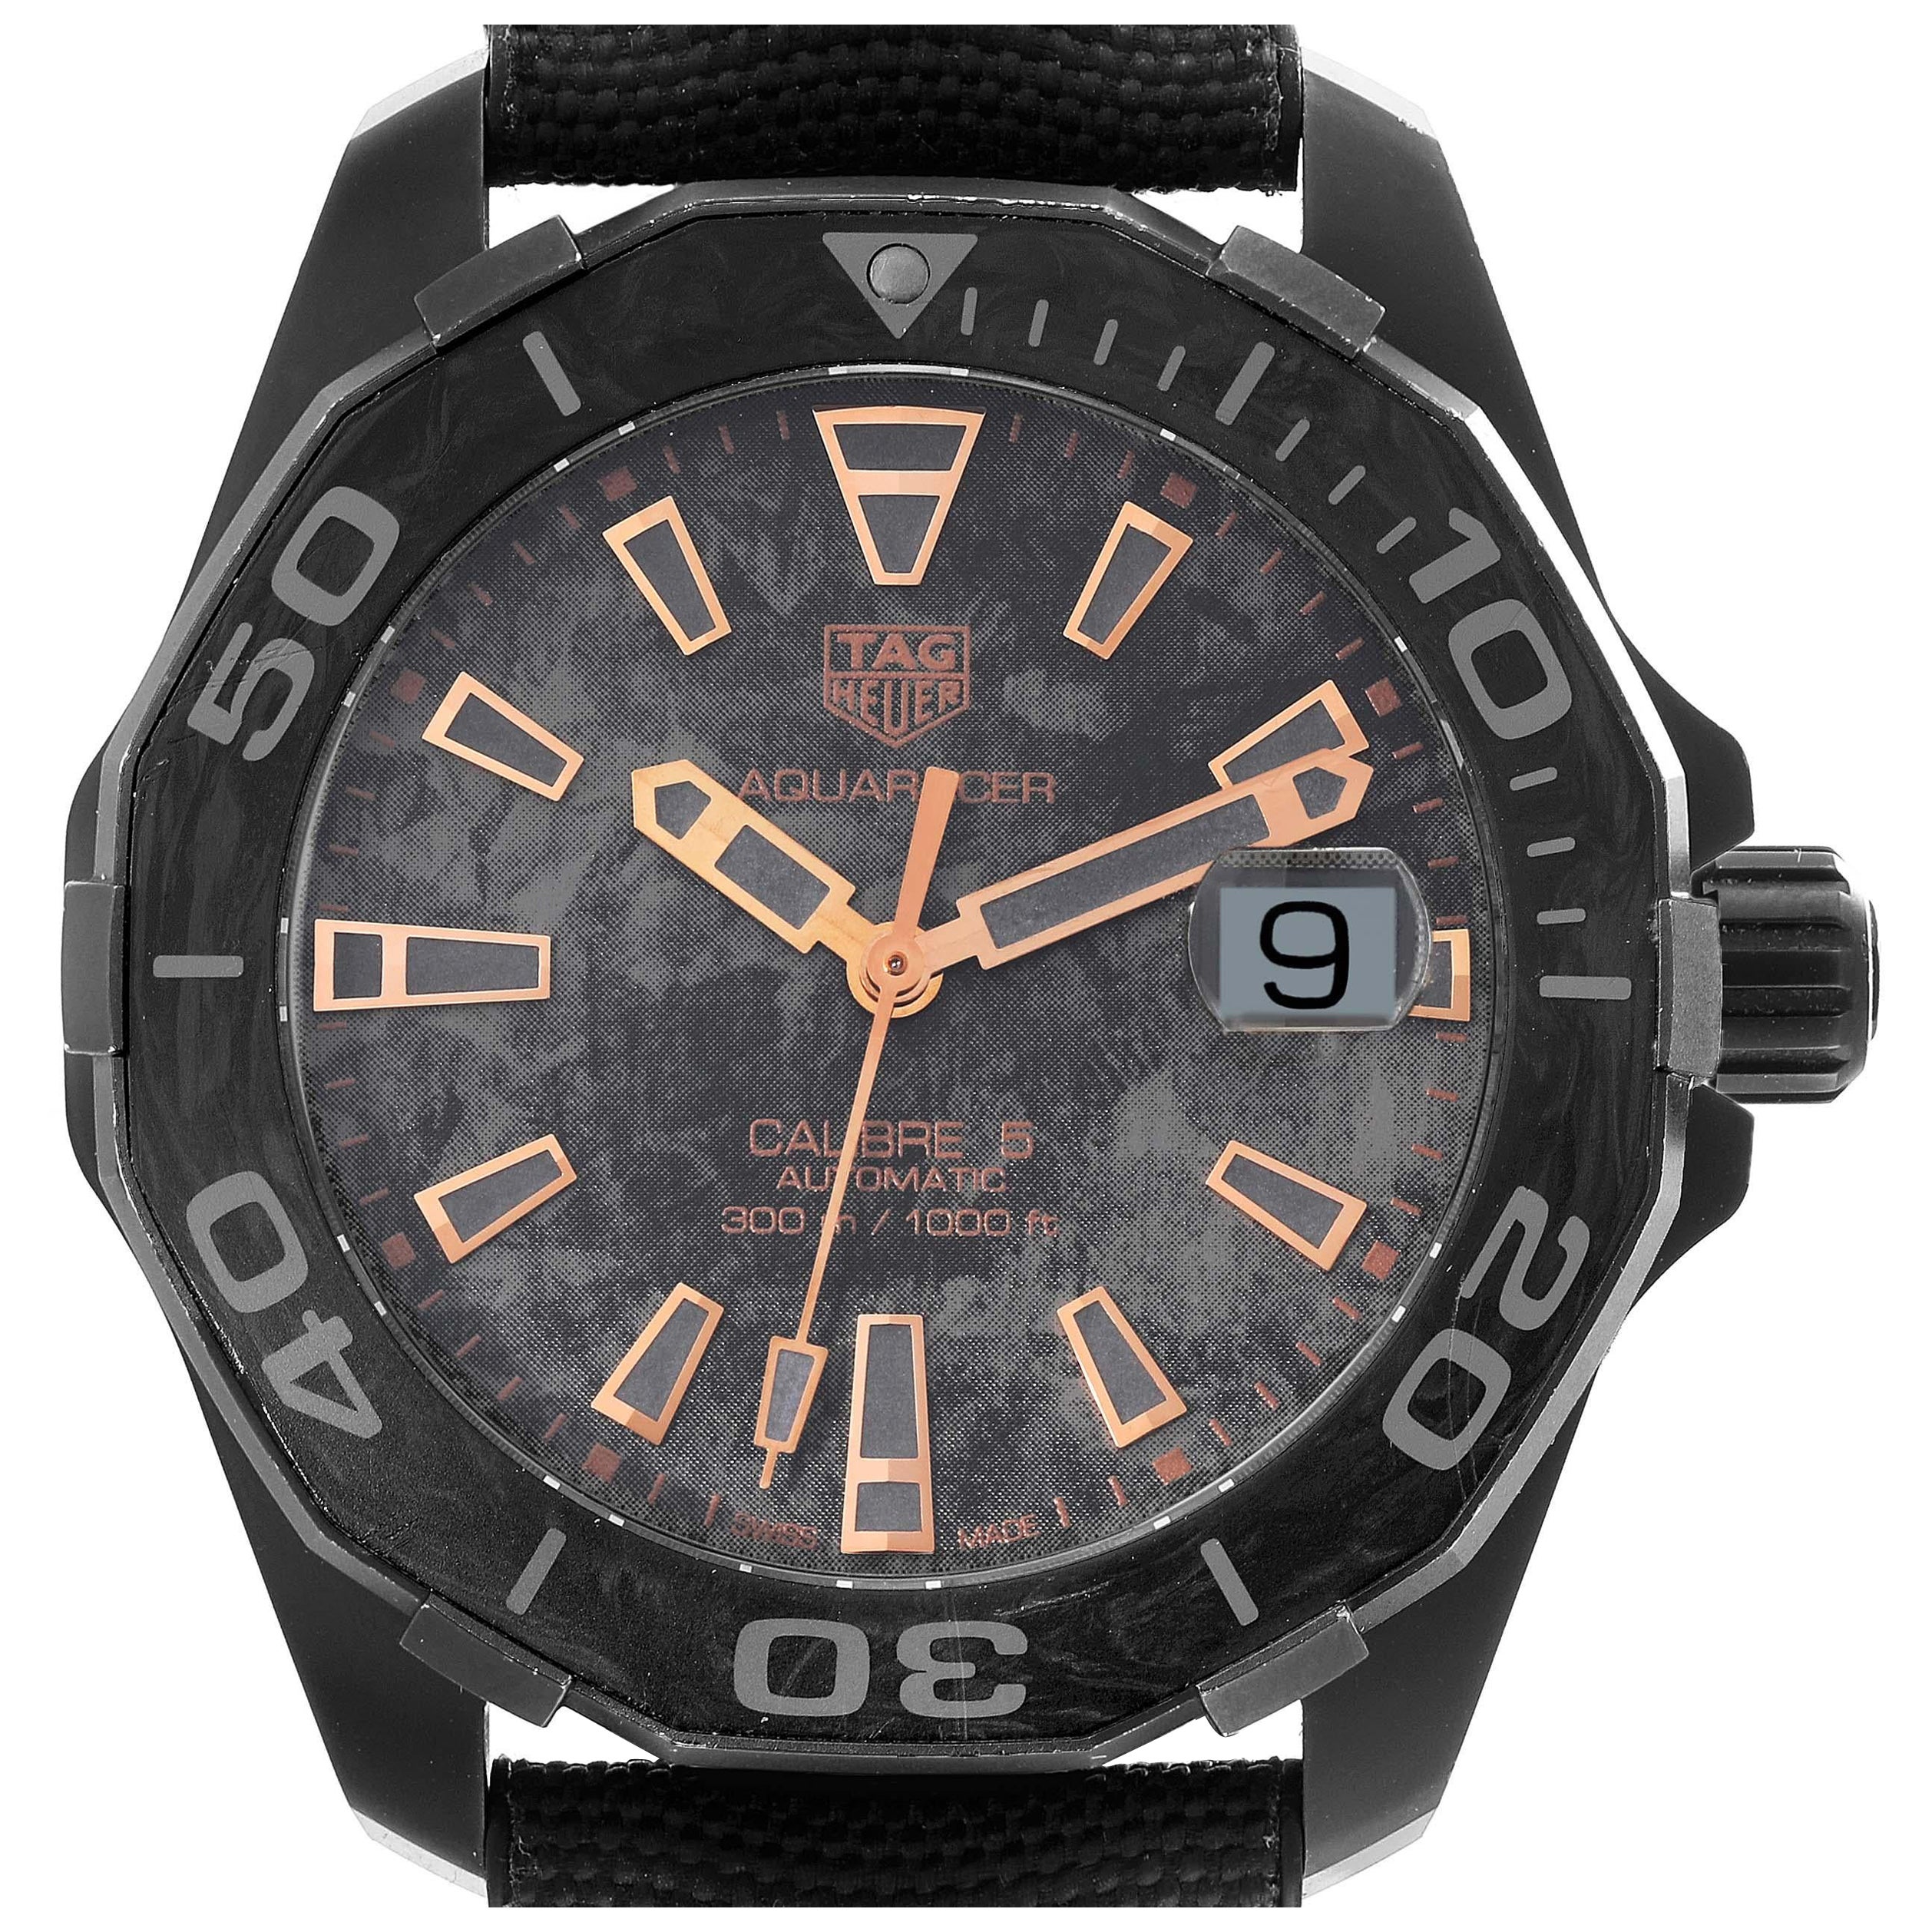 Tag Heuer Aquaracer Titanium Carbon Limited Edition Mens Watch WBD218A For Sale